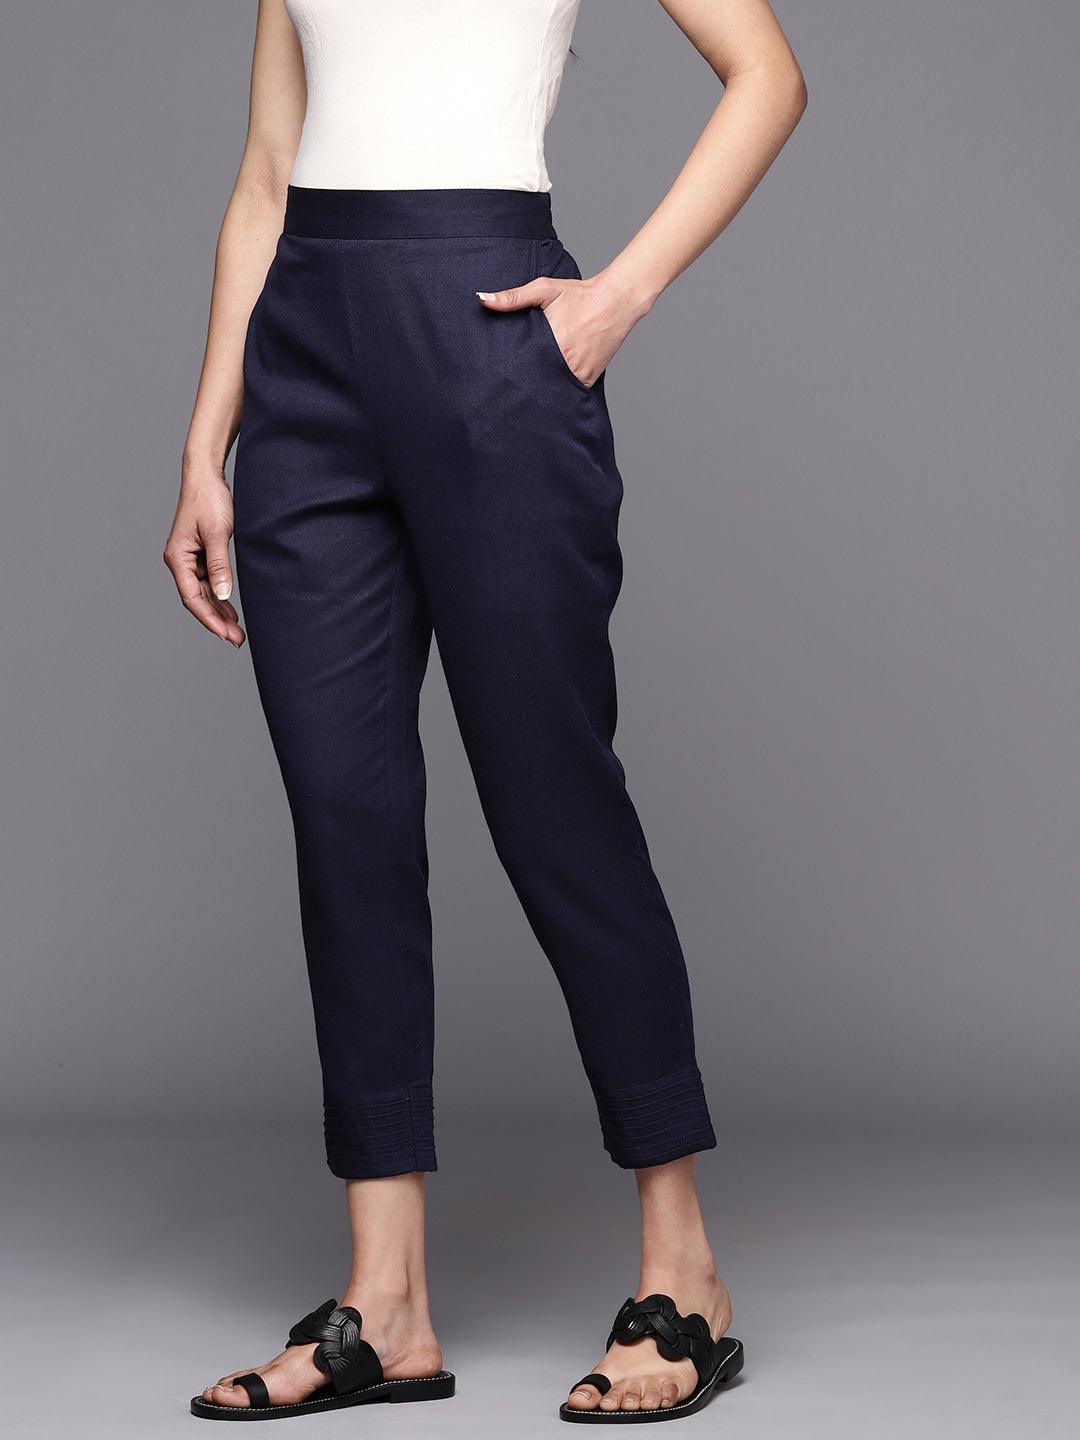 Navy Blue Solid Cotton Trousers